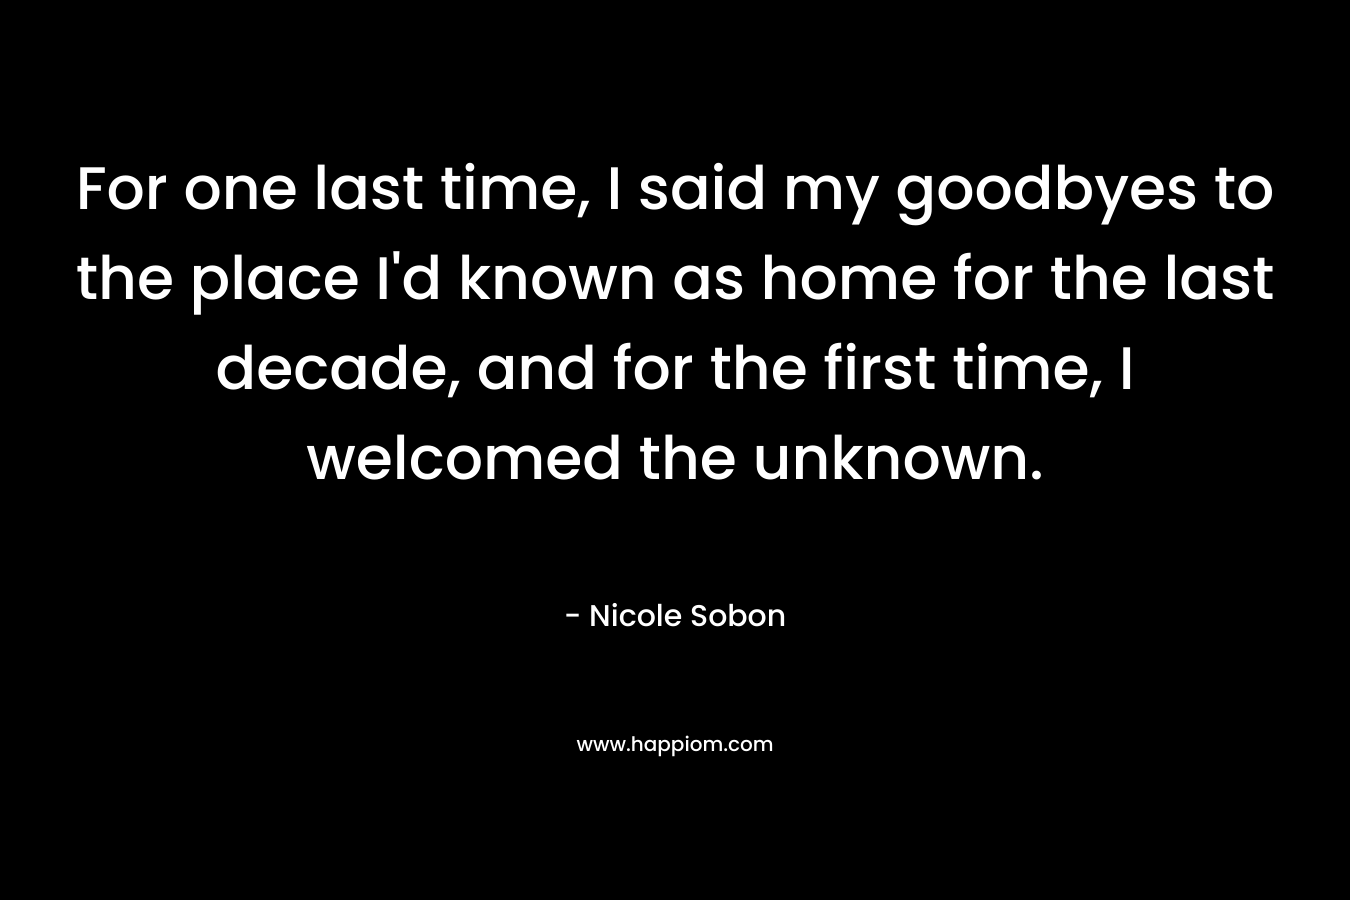 For one last time, I said my goodbyes to the place I’d known as home for the last decade, and for the first time, I welcomed the unknown. – Nicole Sobon